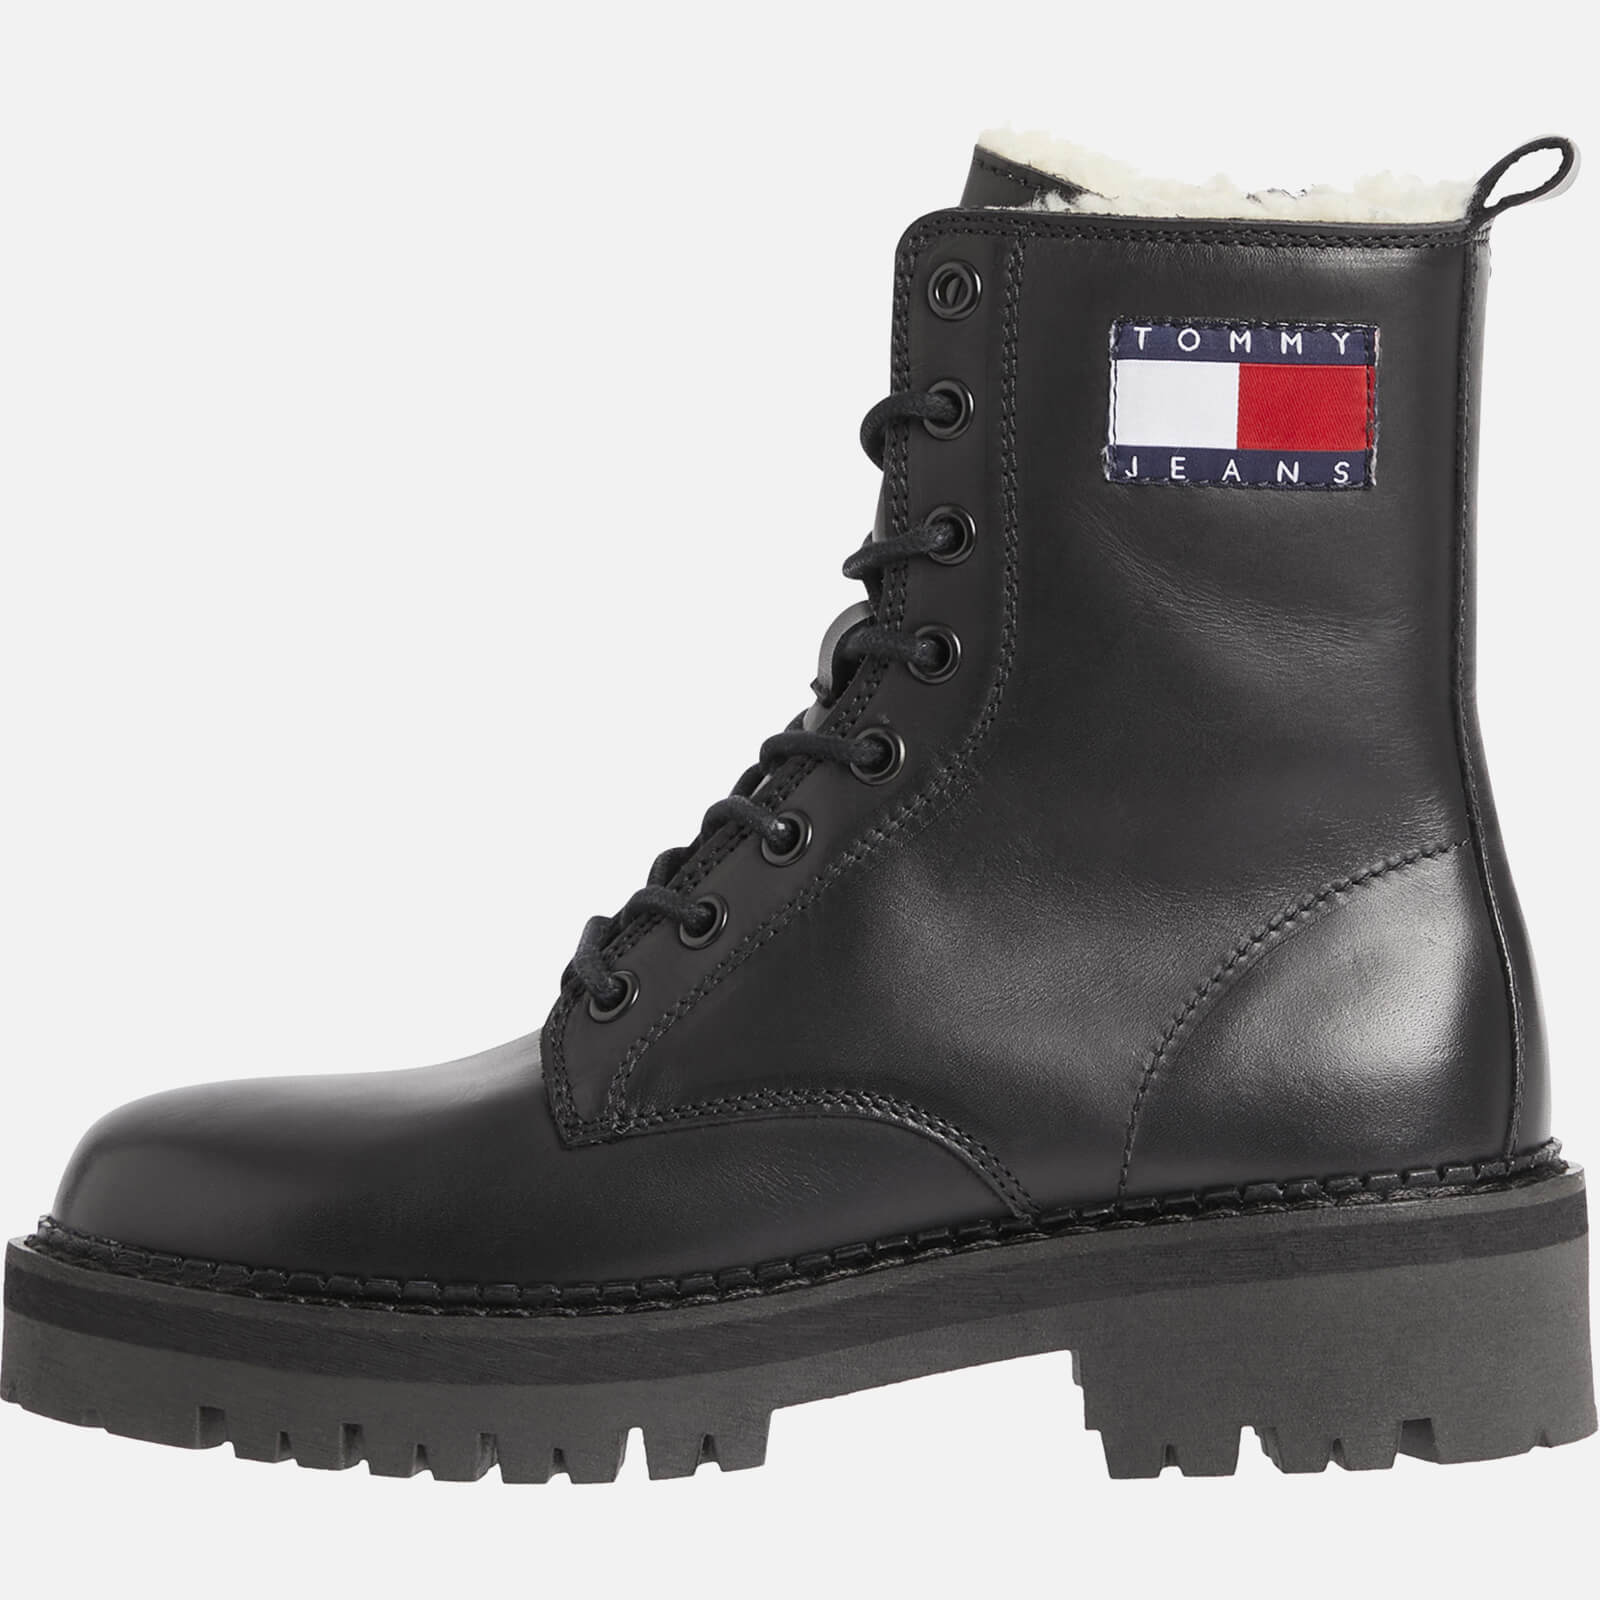 Tommy Jeans Women’s Flag Leather Lace Up Boots - Black